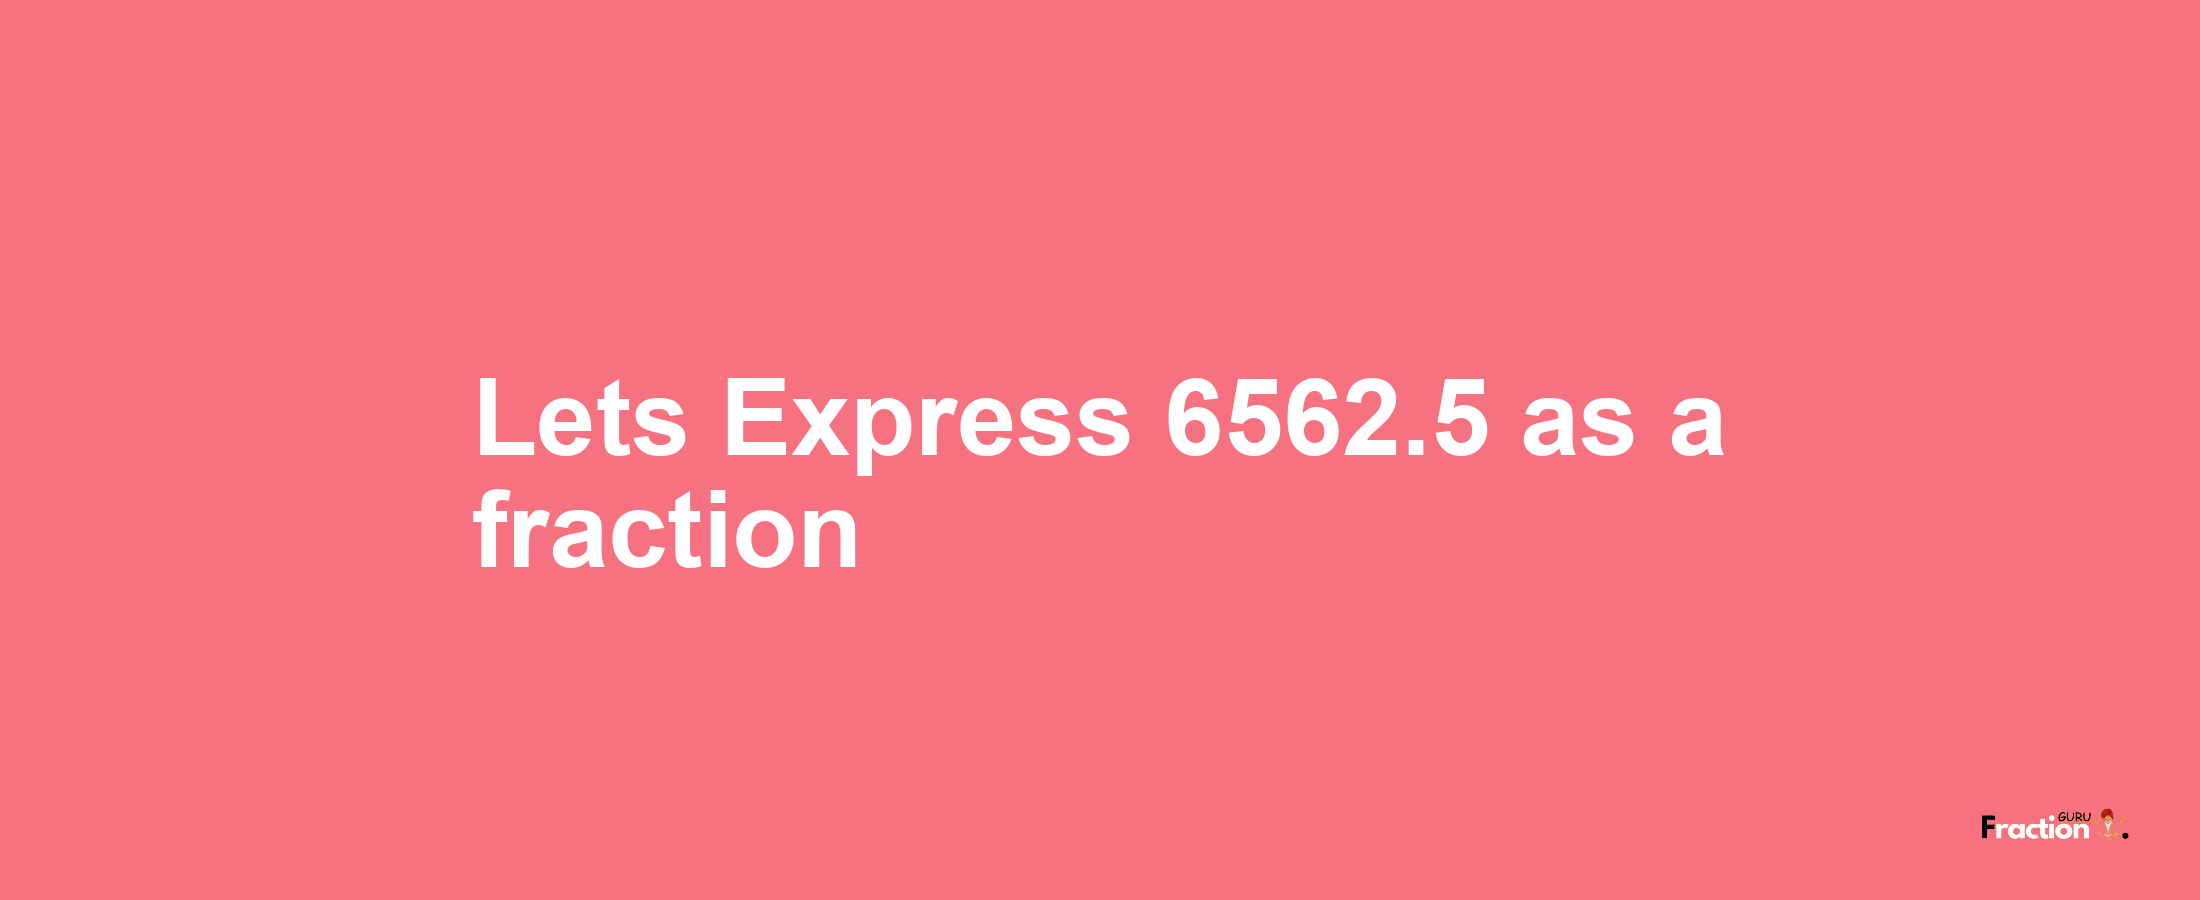 Lets Express 6562.5 as afraction